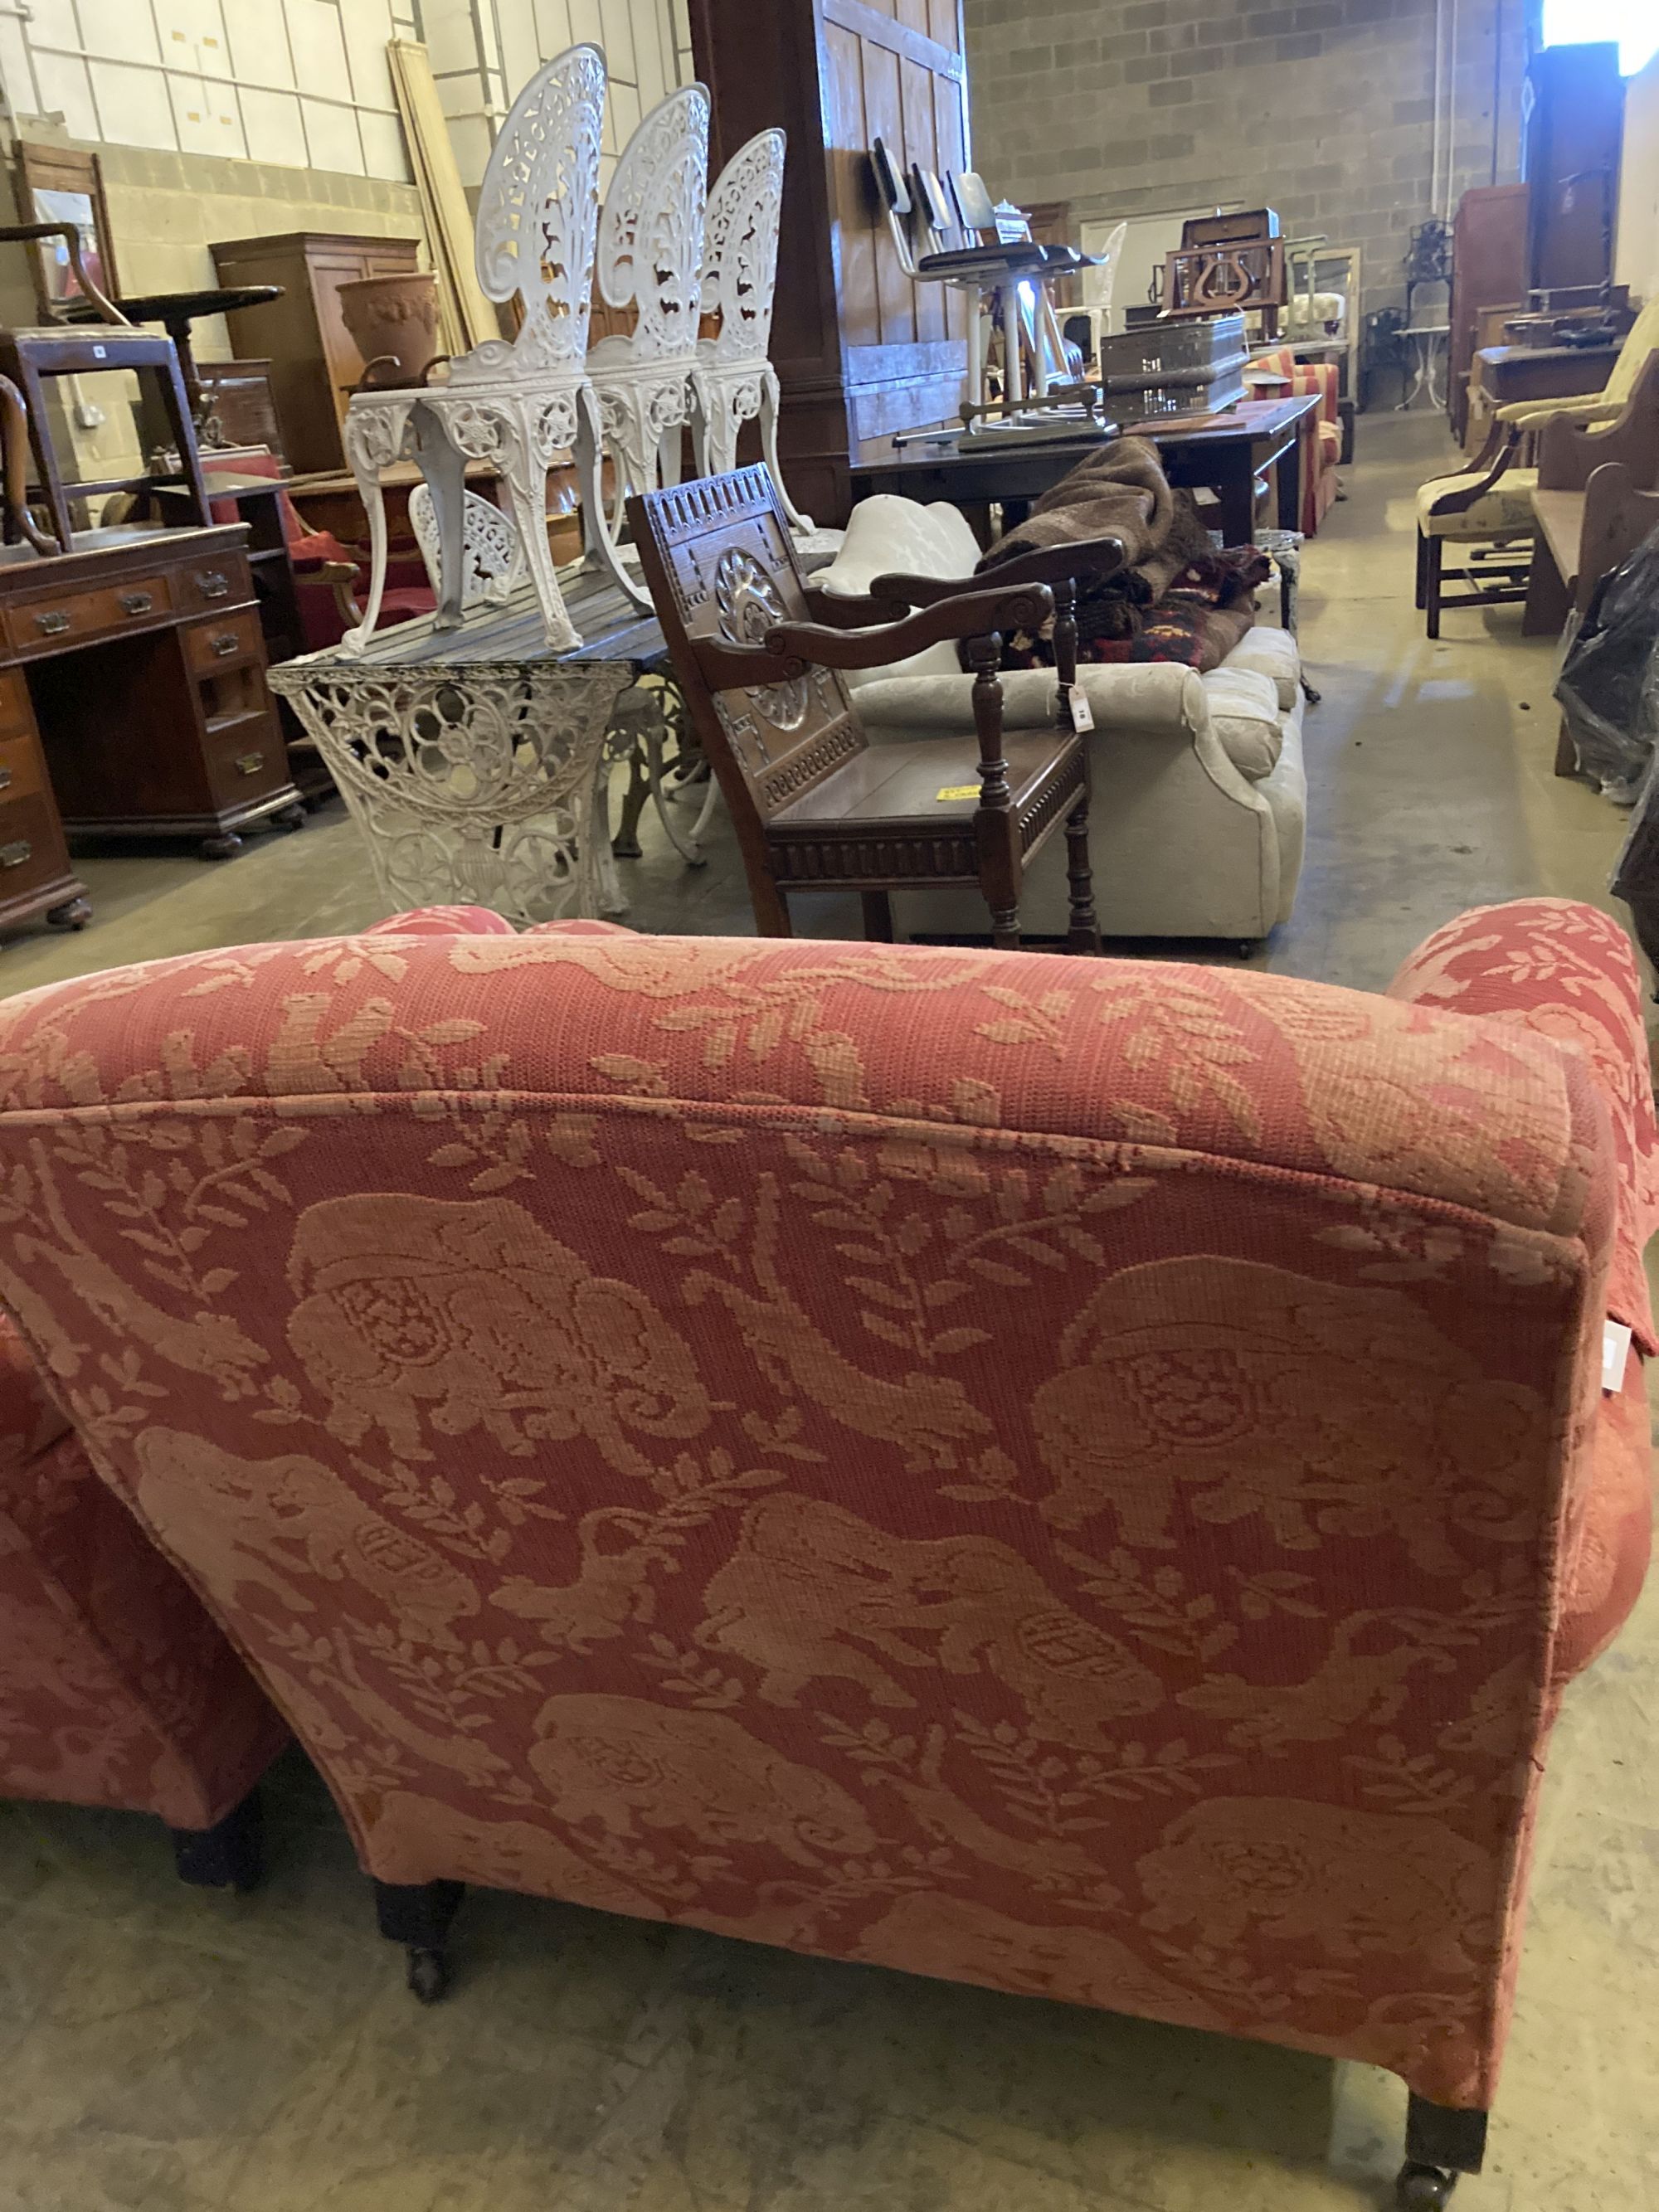 A pair of late Victorian style upholstered lounge armchairs, width 88cm, depth 98cm, height 83cm